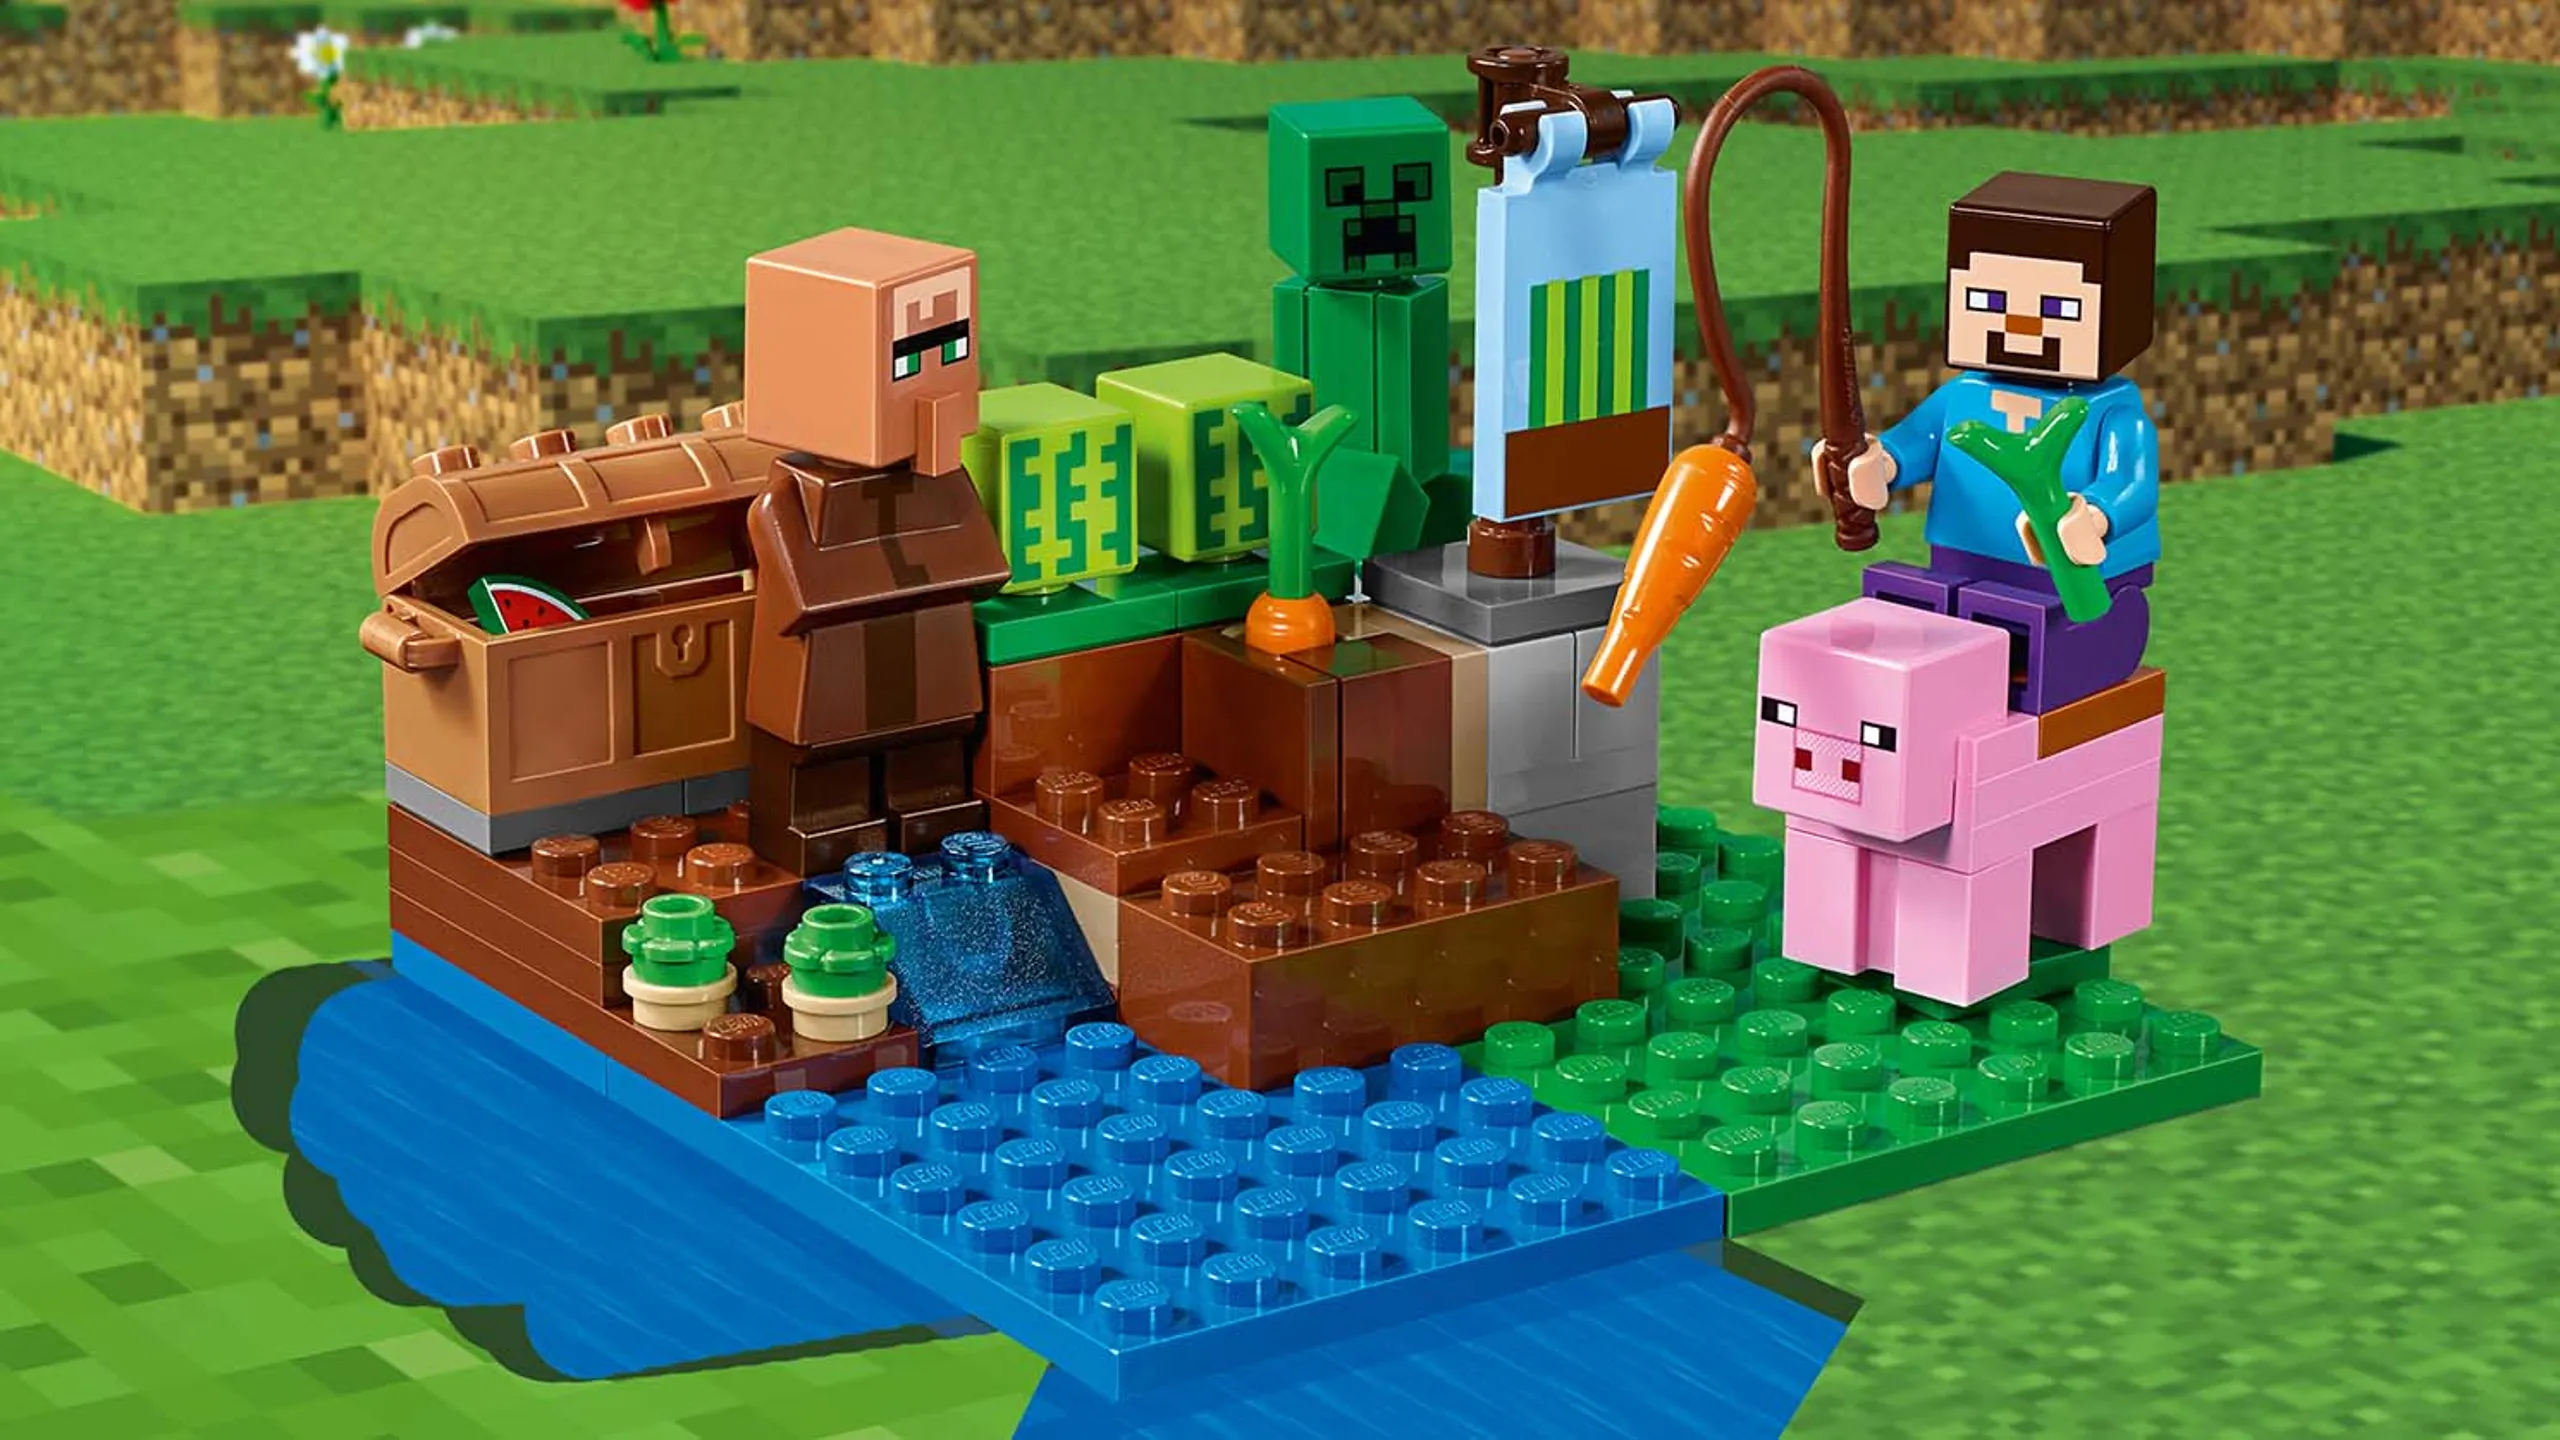 LEGO Minecraft - 21138 The Melon Farm - Craft a Carrot on a Stick, climb onto your saddled pig and guide it to the Melon Farm where you grow carrots, melons and potatoes.